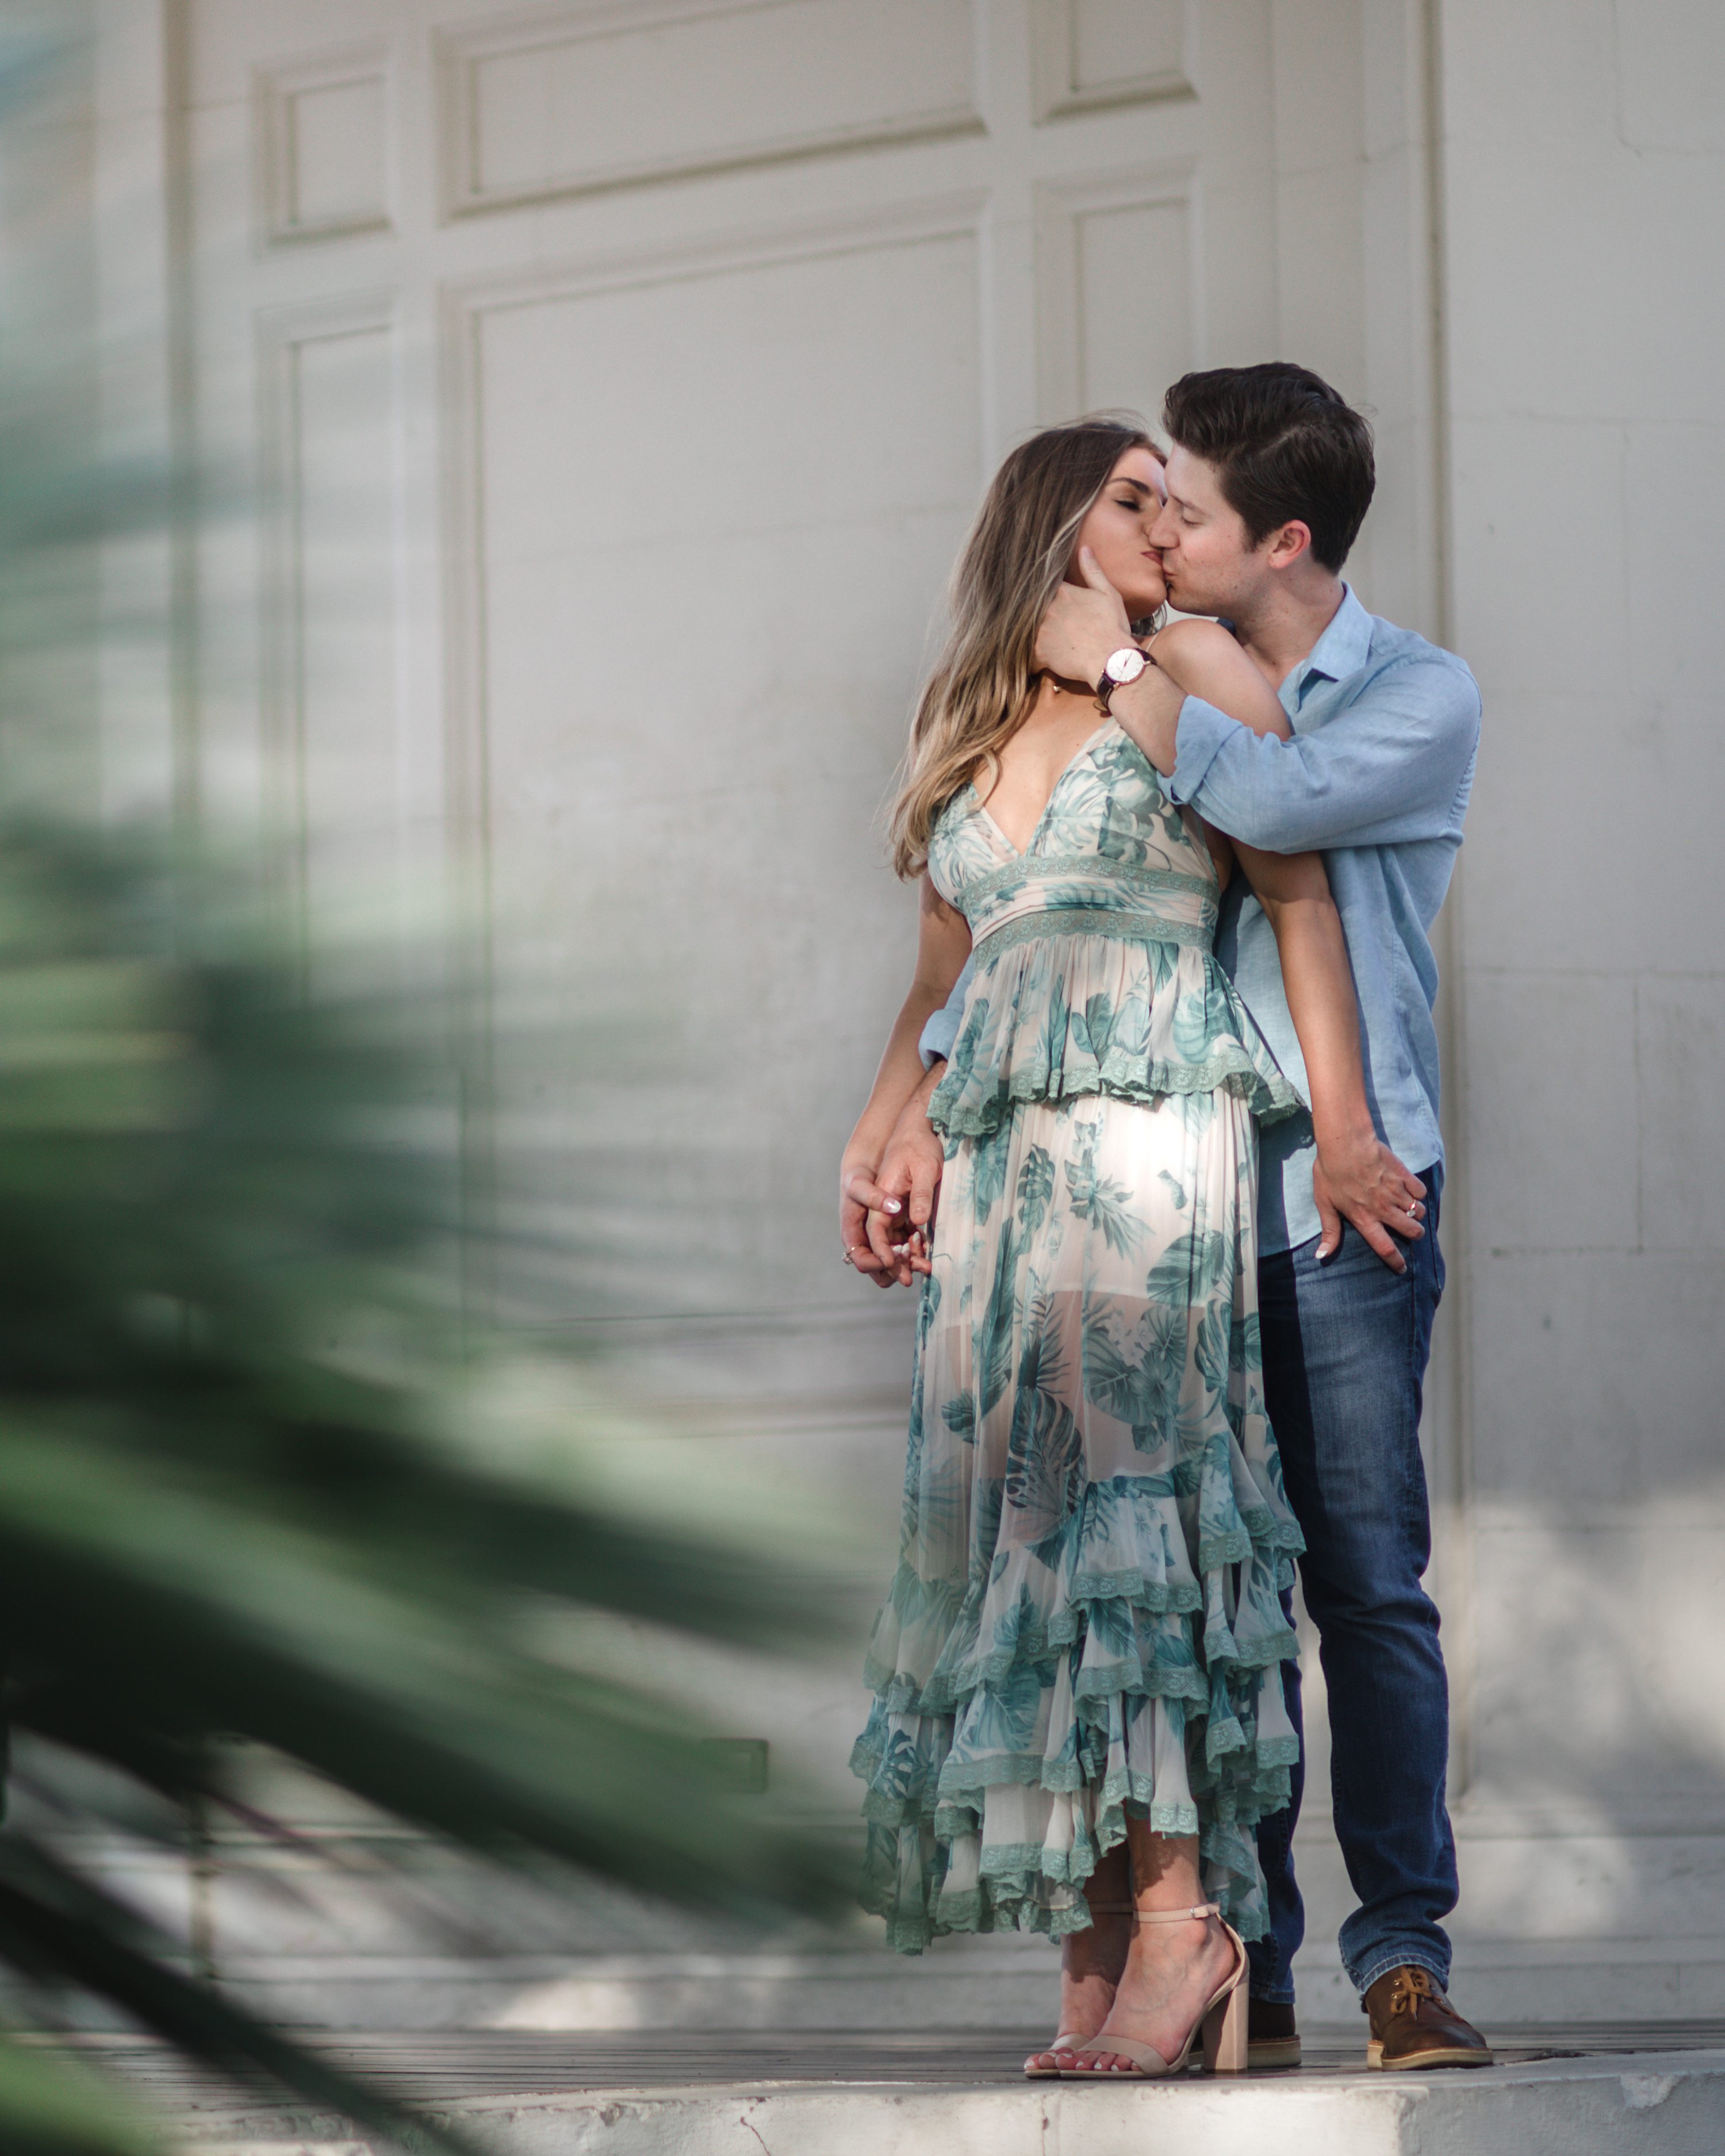 New Orleans Couples Photos,New Orleans Wedding Photographer